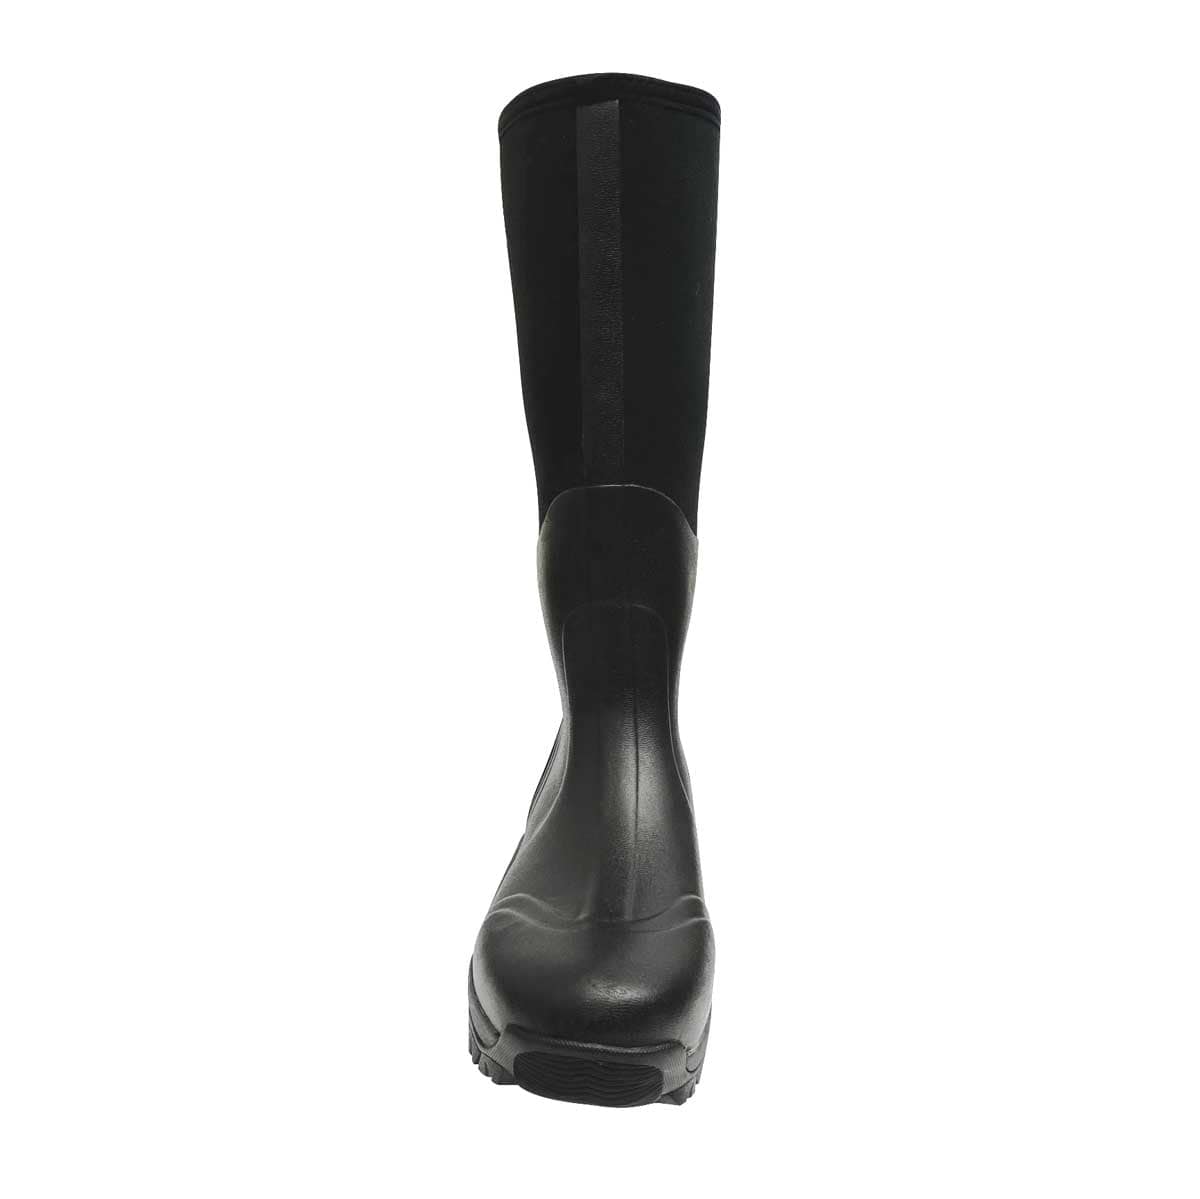 Sugar River by Gemplers 16" Plain Toe Chore Boots